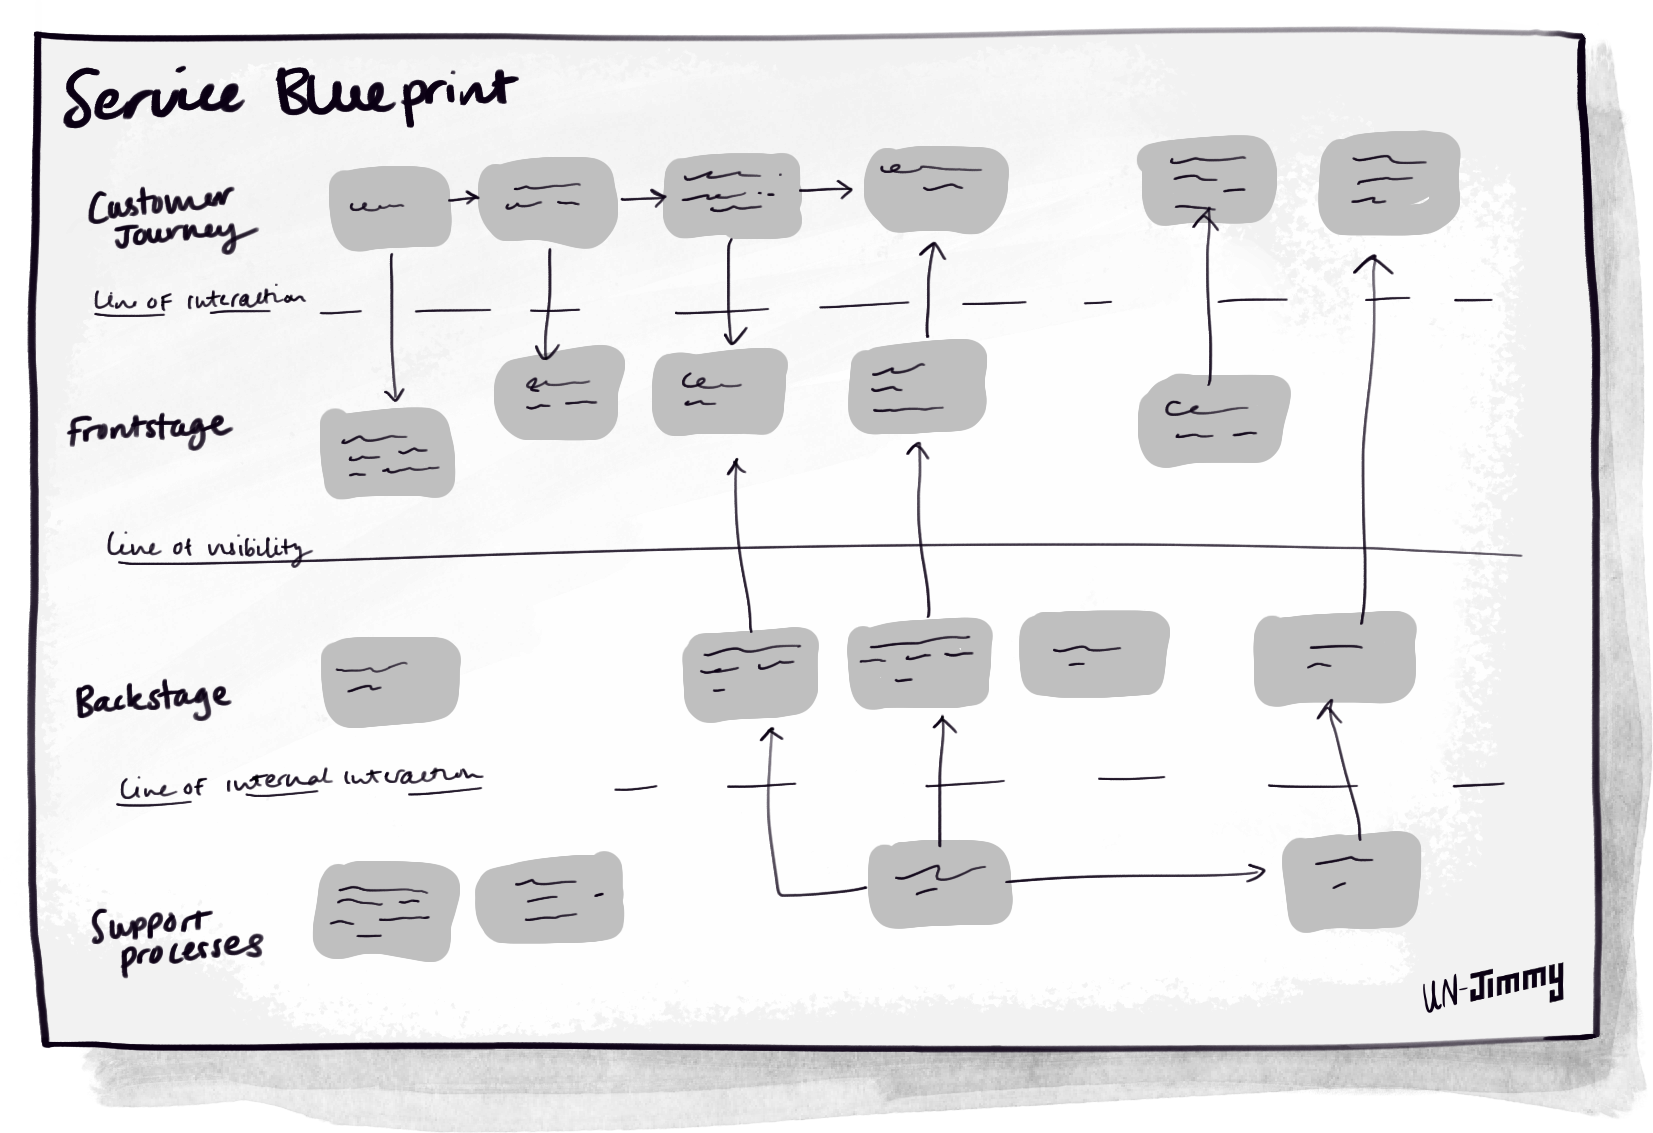 The Service Blueprint includes the Customer Journey, the Frontstage, the Backstage, and the Support Processes, separated by the line of interaction, of visibility and internal interaction respectively.